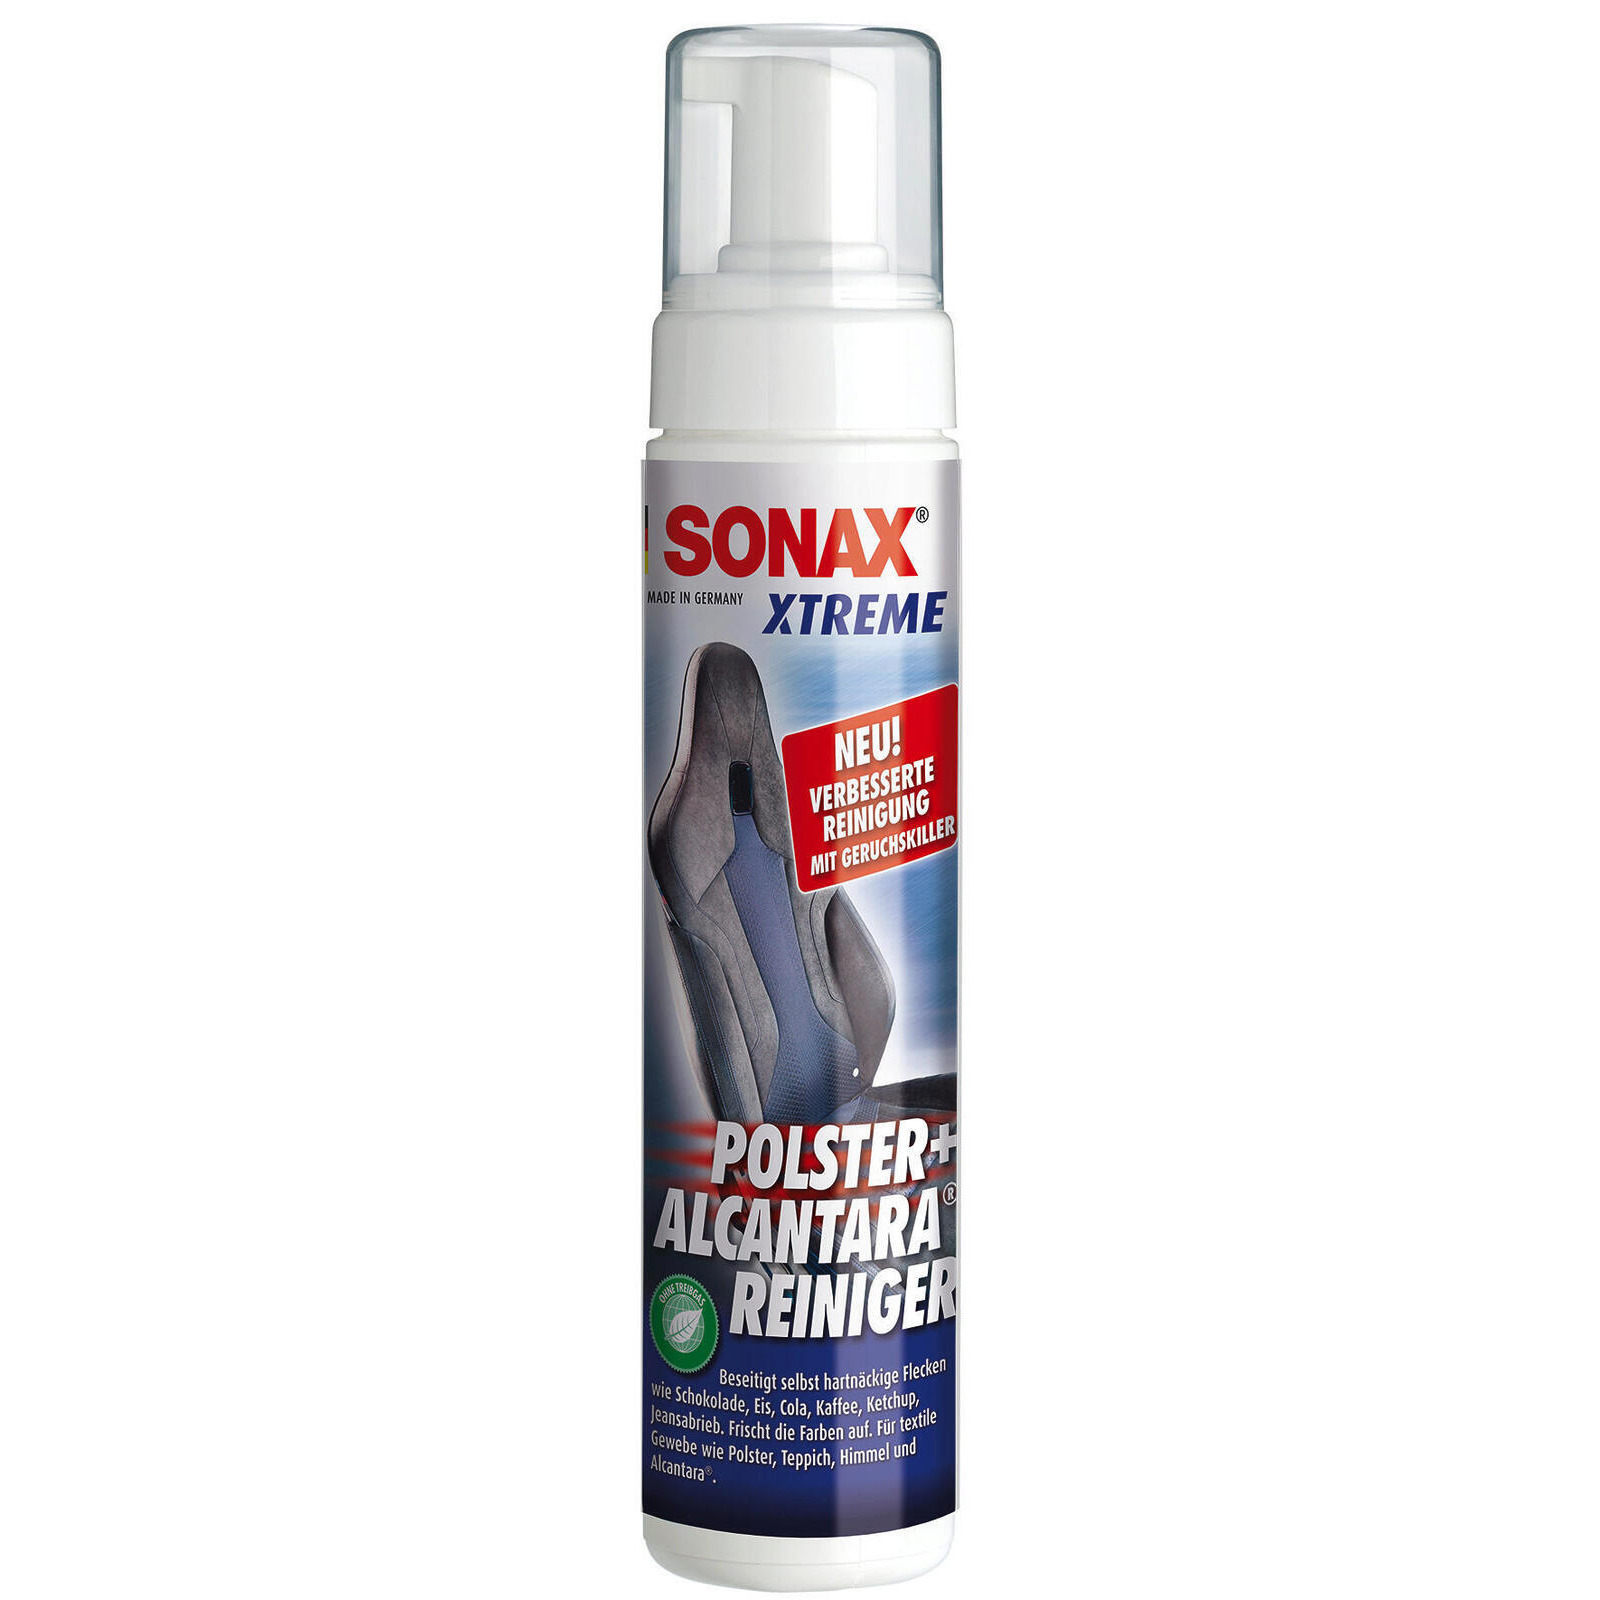 SONAX Textile / Carpet Cleaner Xtreme Upholstery & AlcantaraCleaner propellant-free